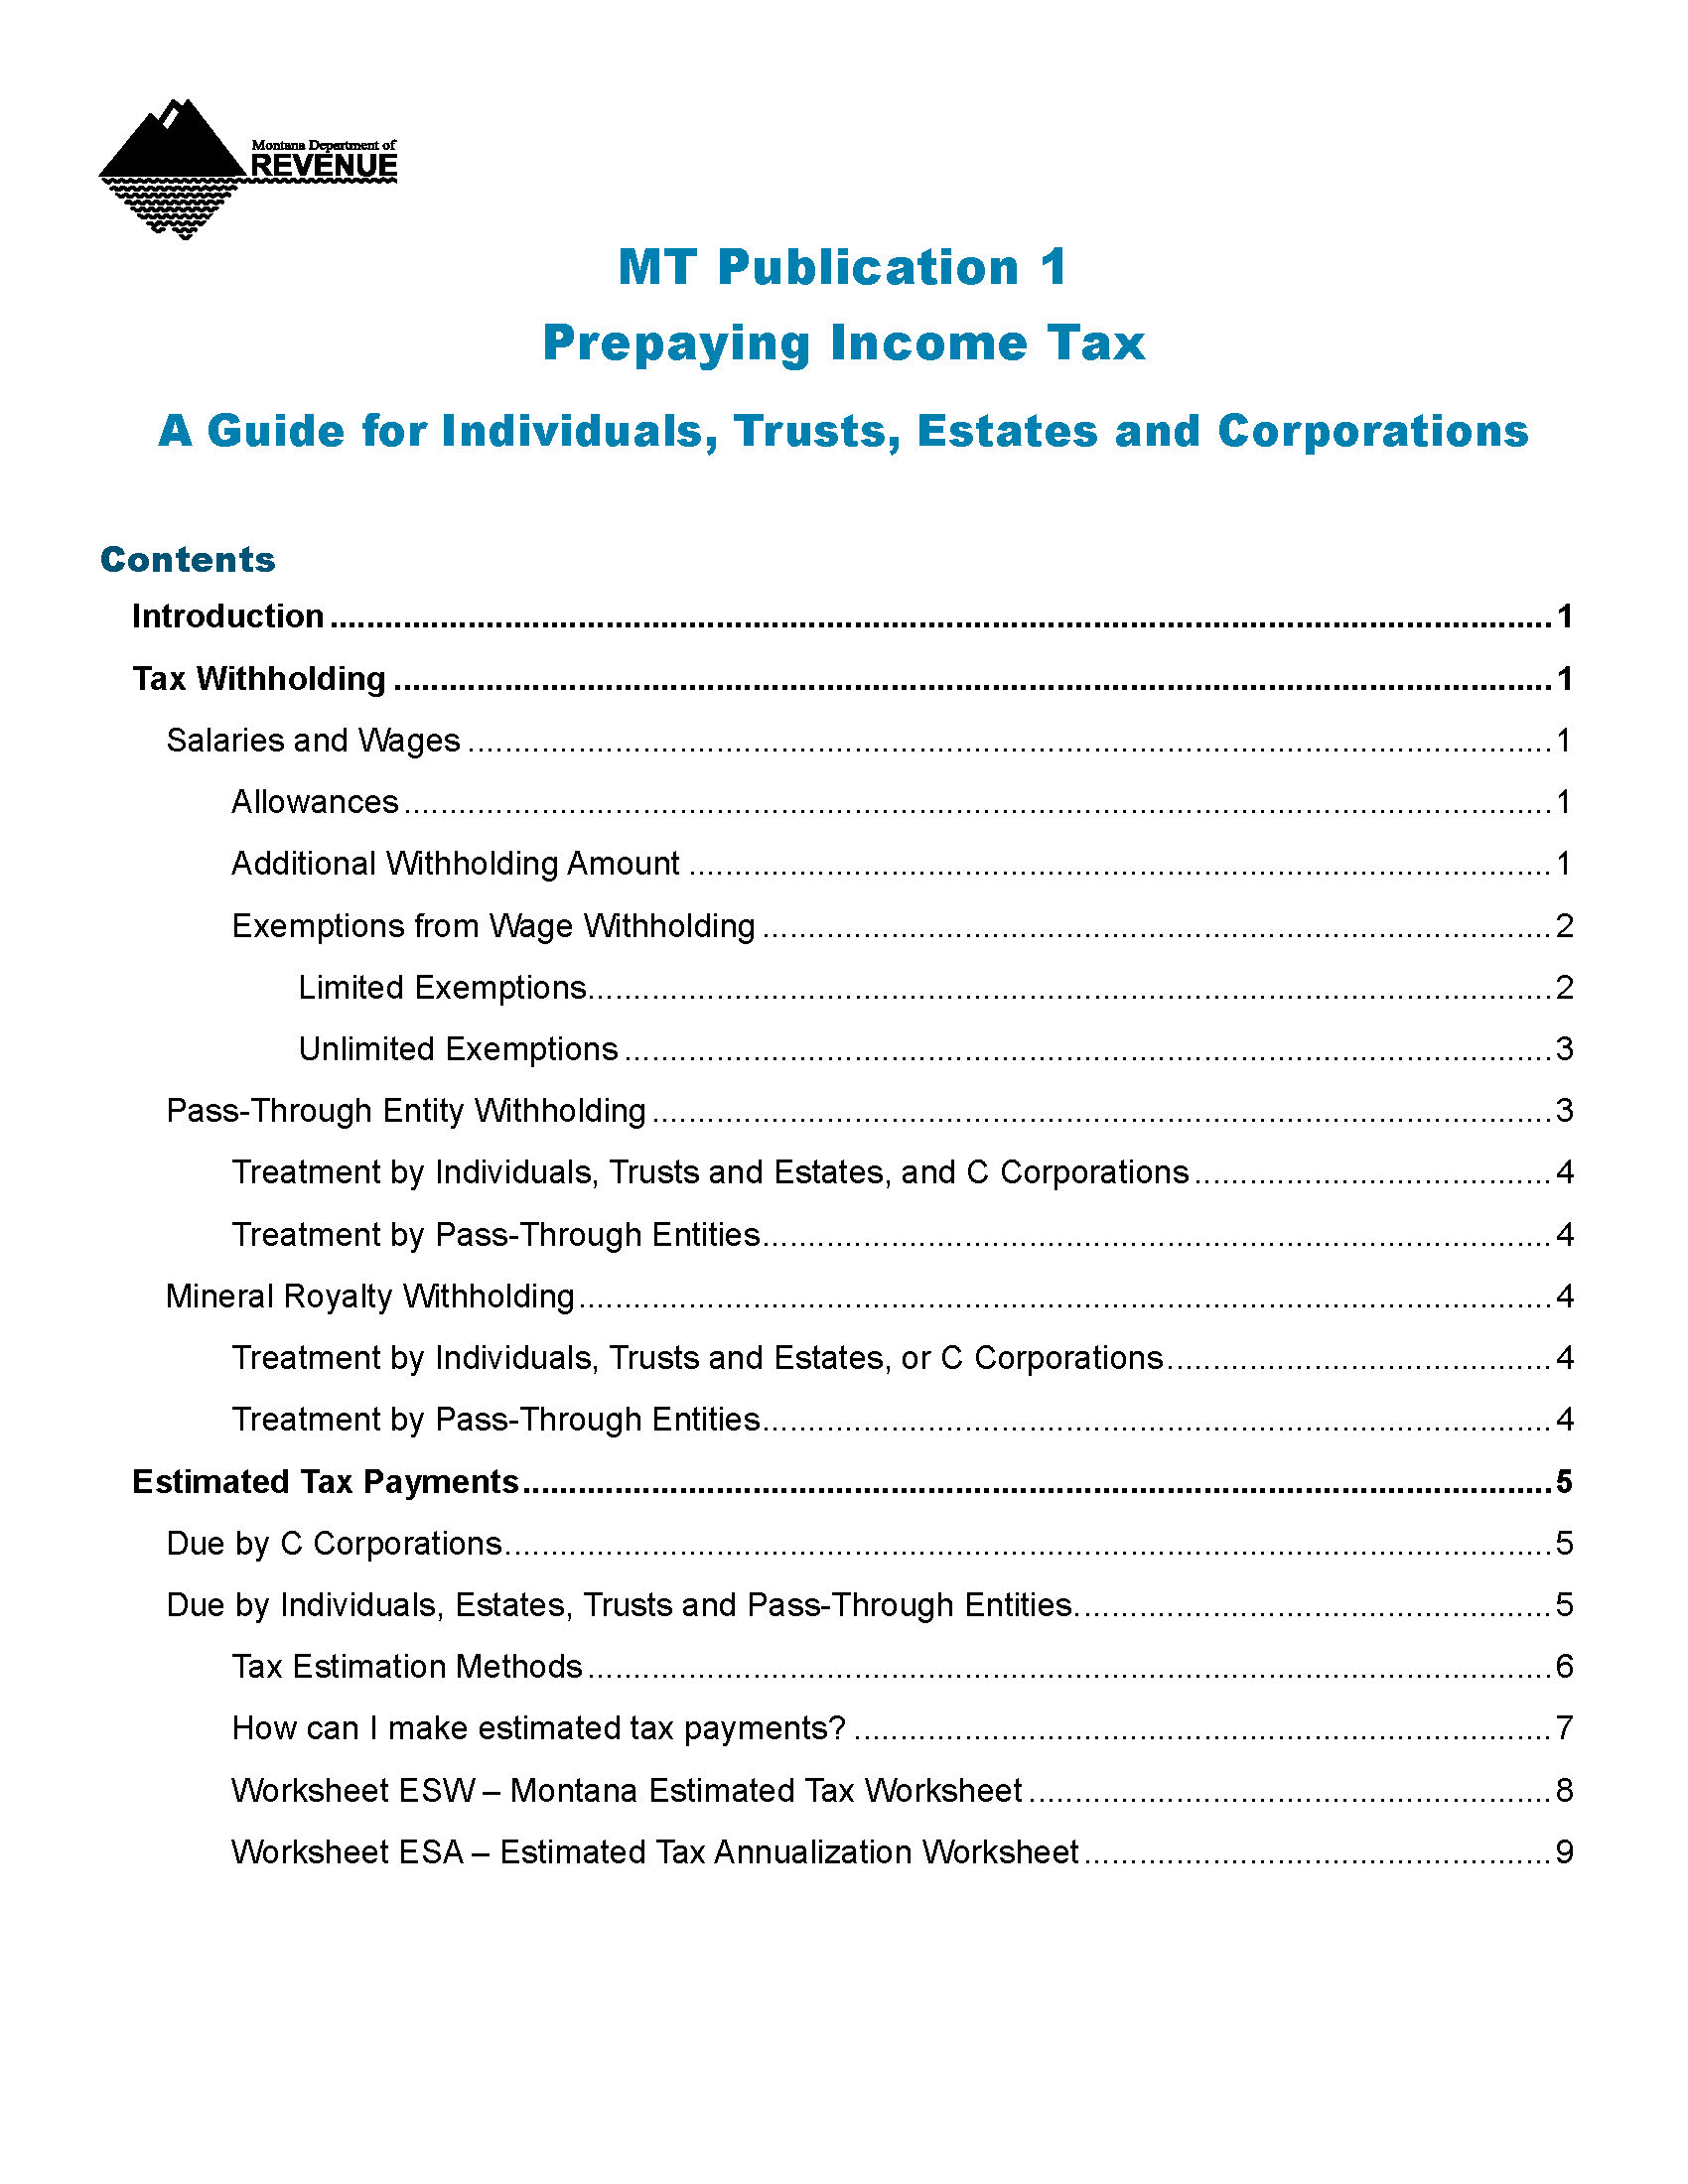 Publication 1: Prepaying Income Tax Cover Sheet